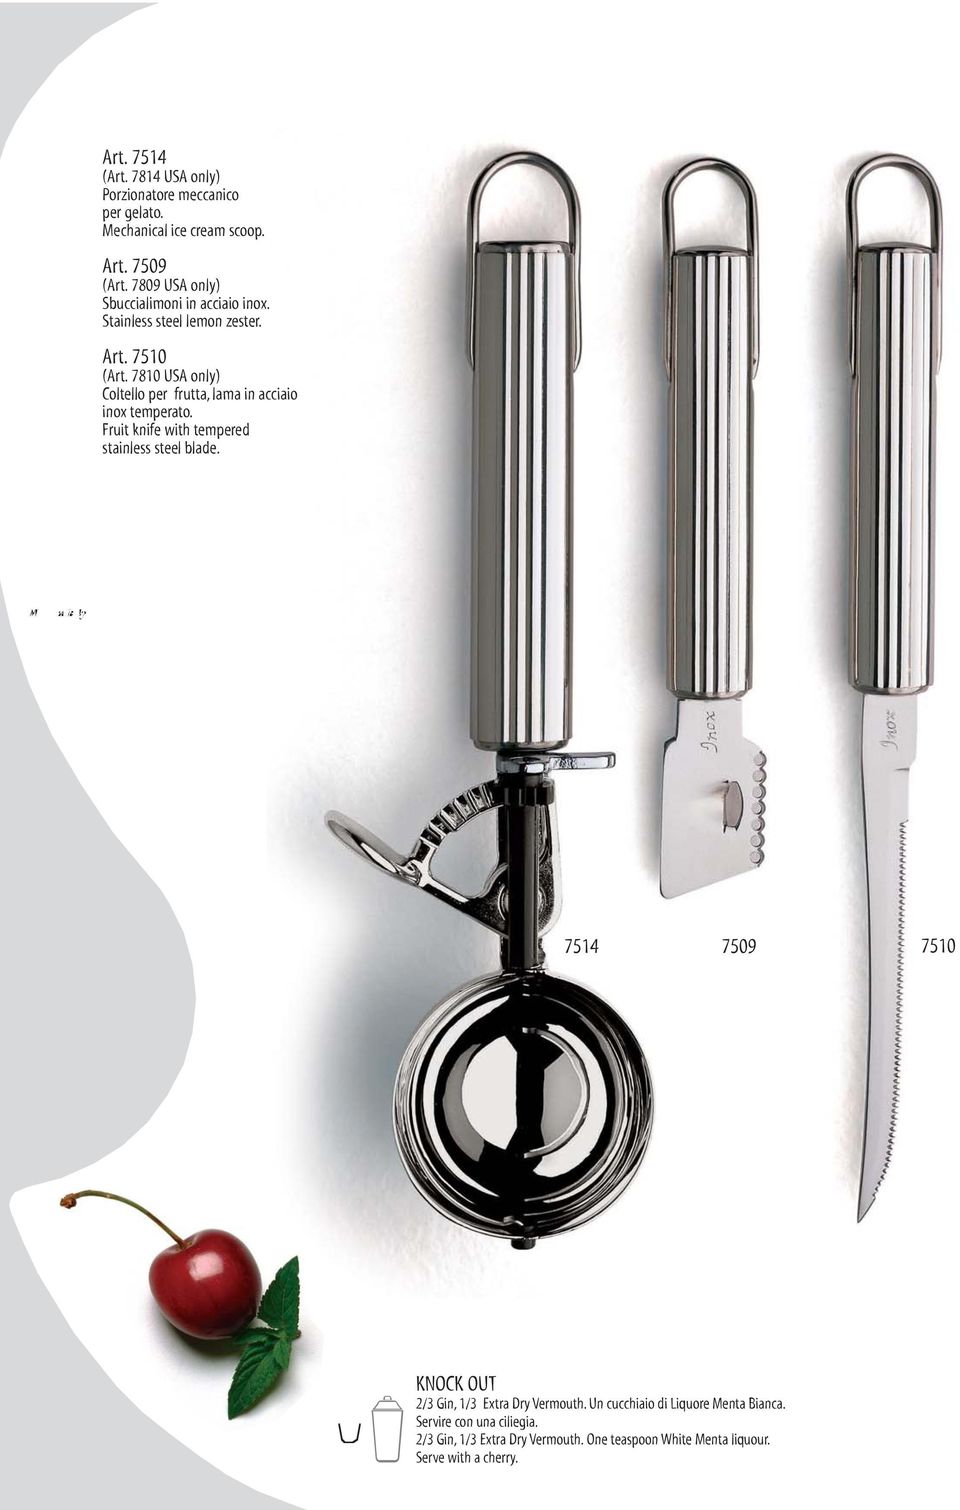 7810 USA only) Coltello per frutta, lama in acciaio inox temperato. Fruit knife with tempered stainless steel blade.